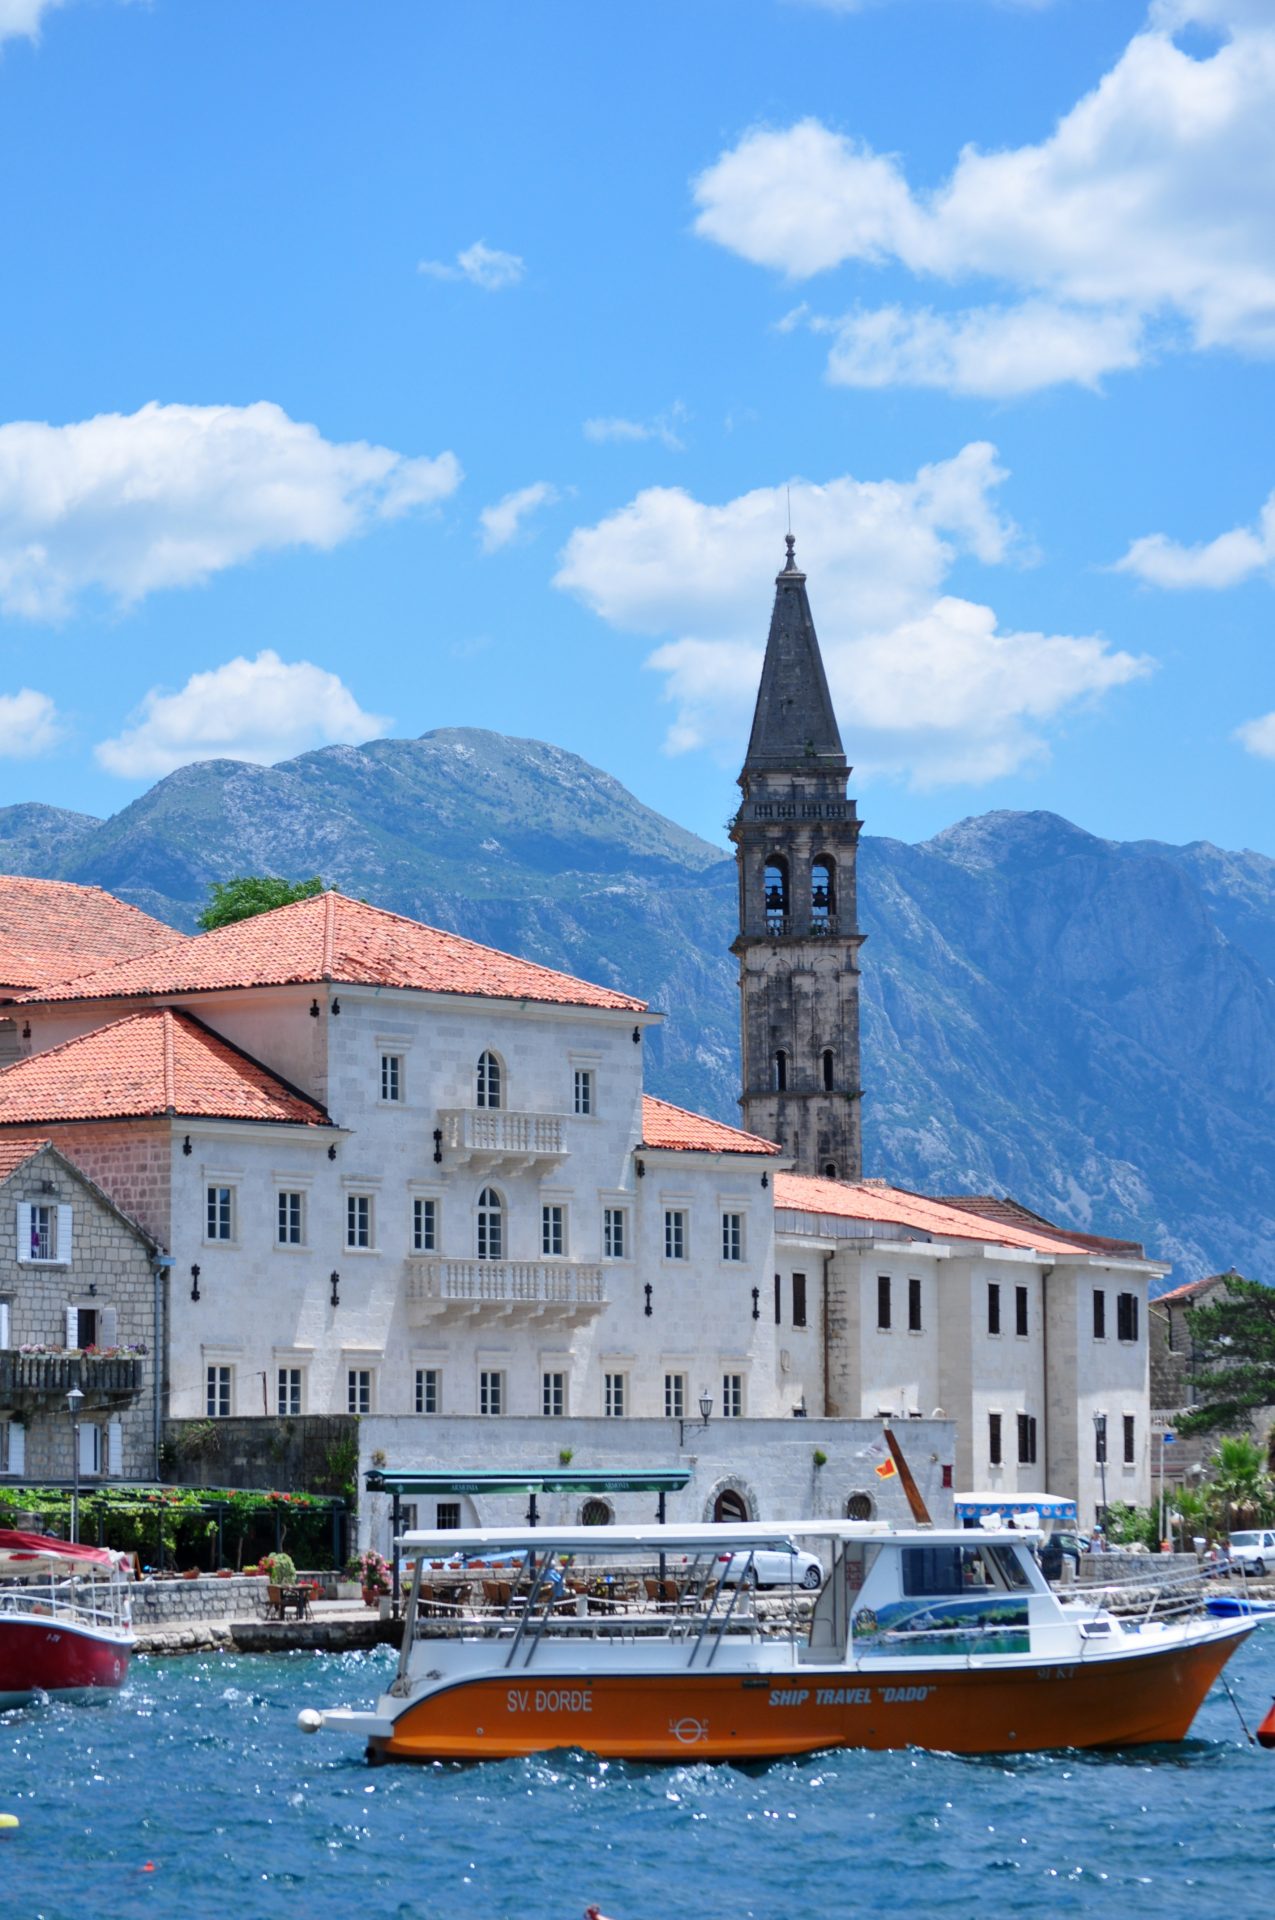 Boat tour starting from Perast